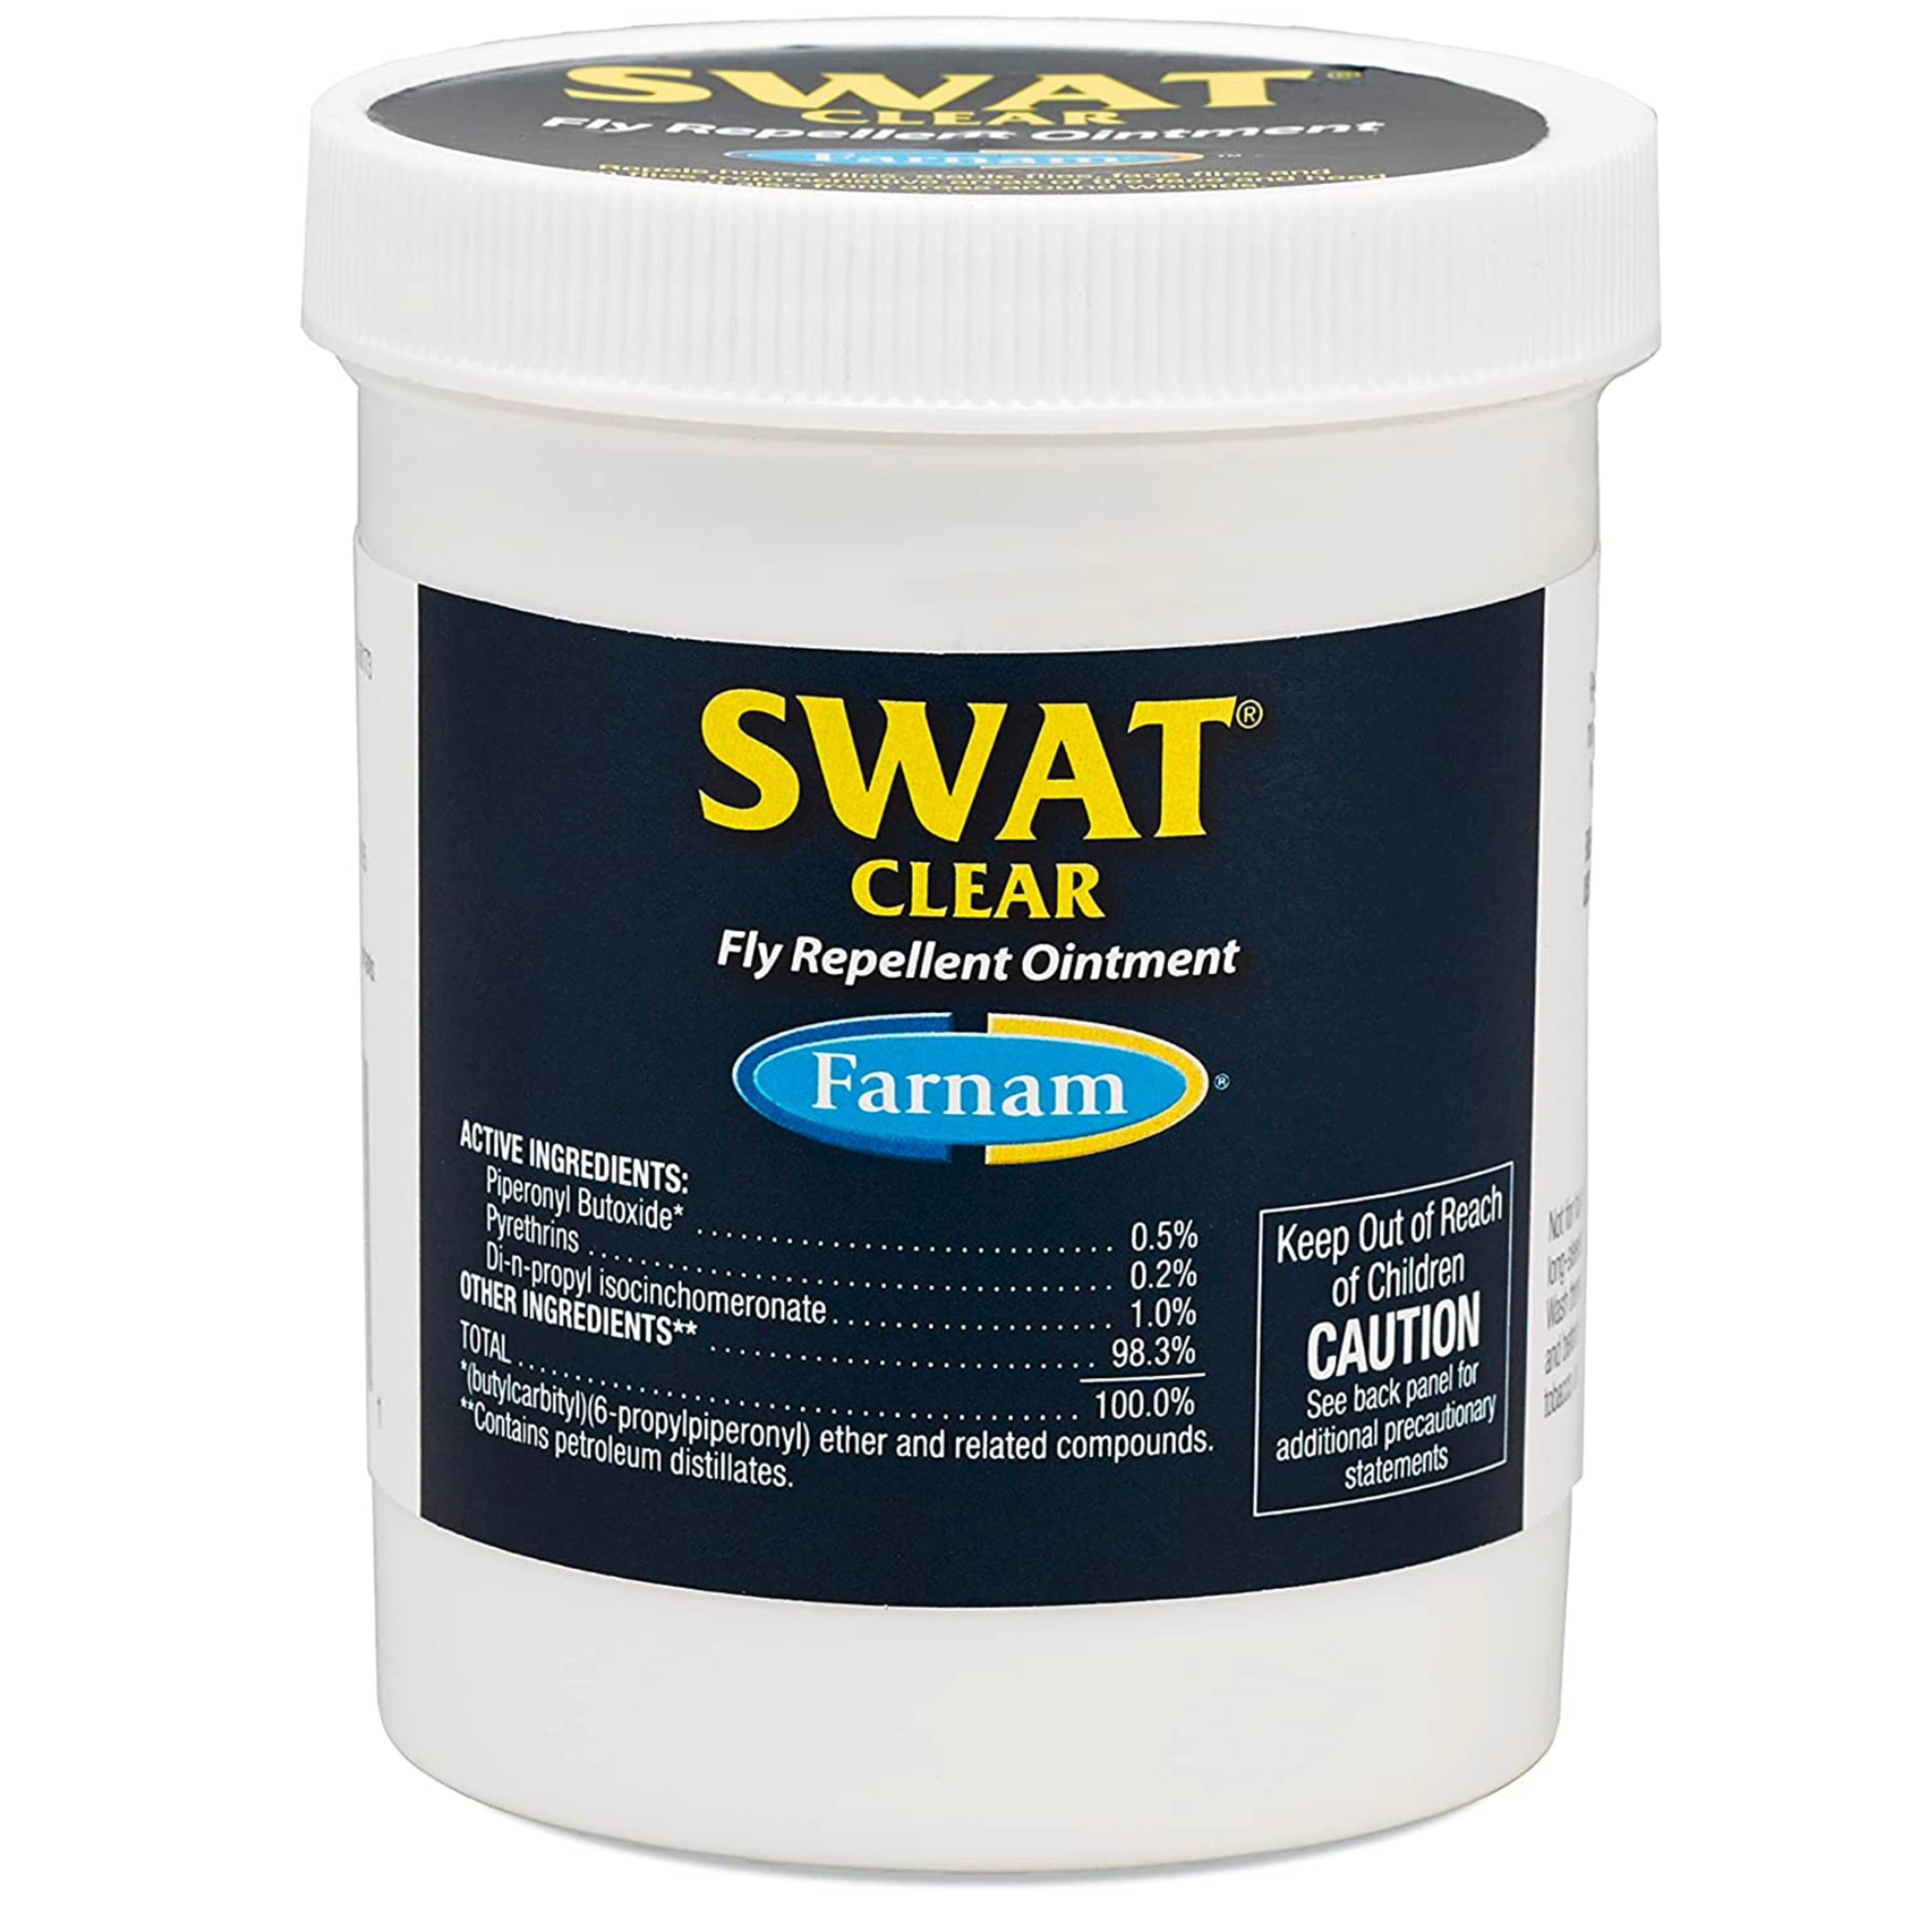 Swat Fly Repellent Ointment 7oz